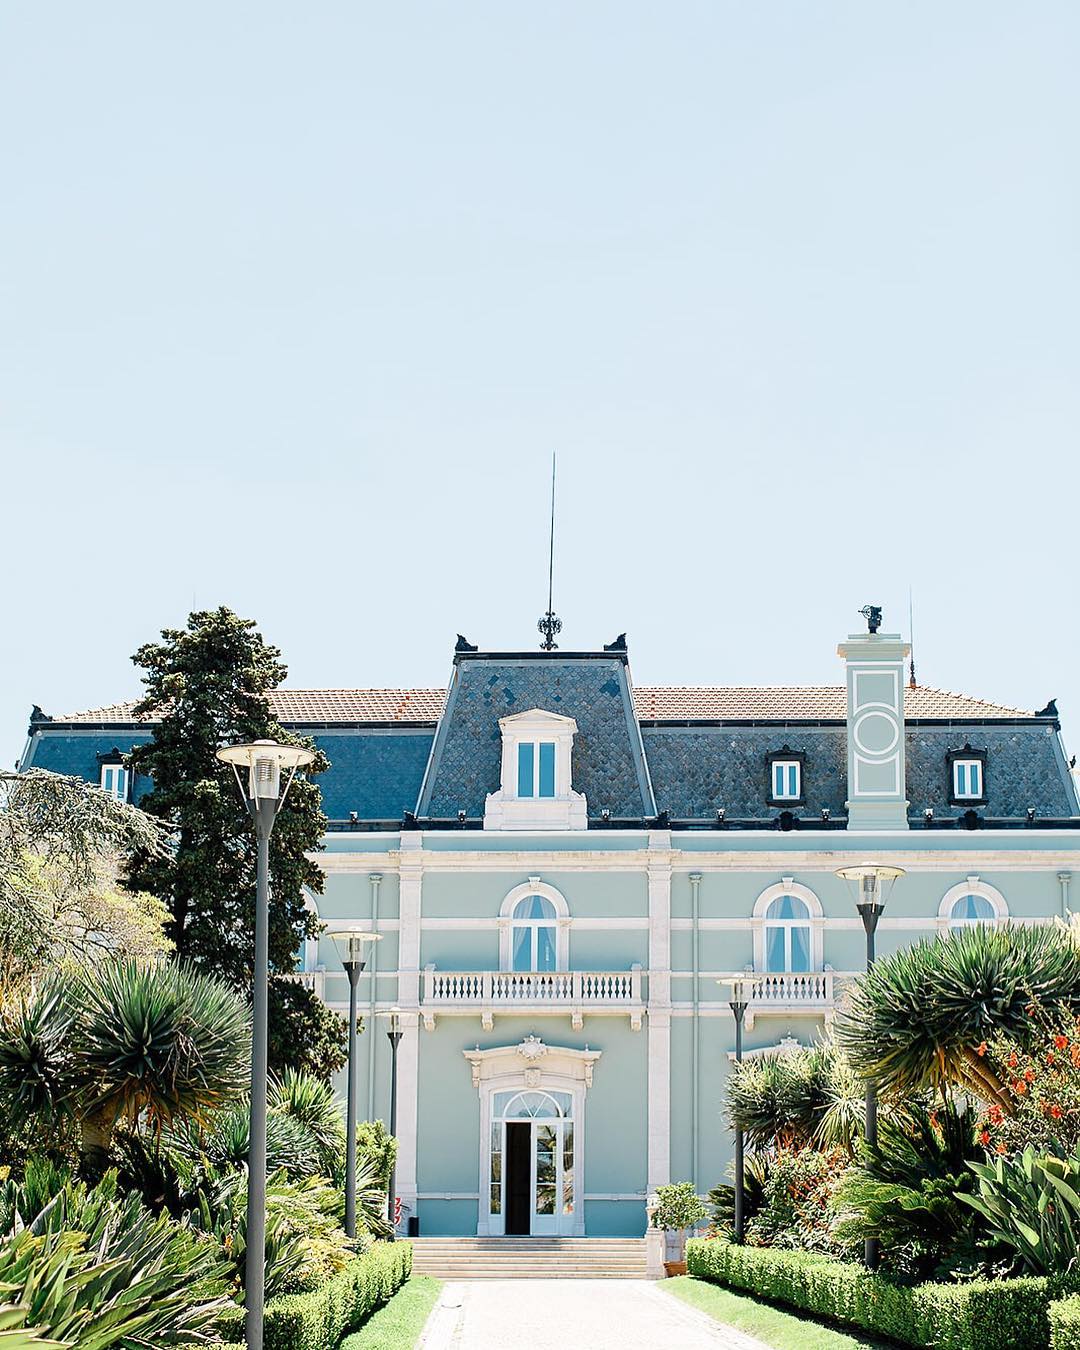 Pestana Palace is a dream venue.This facade goes so well ...